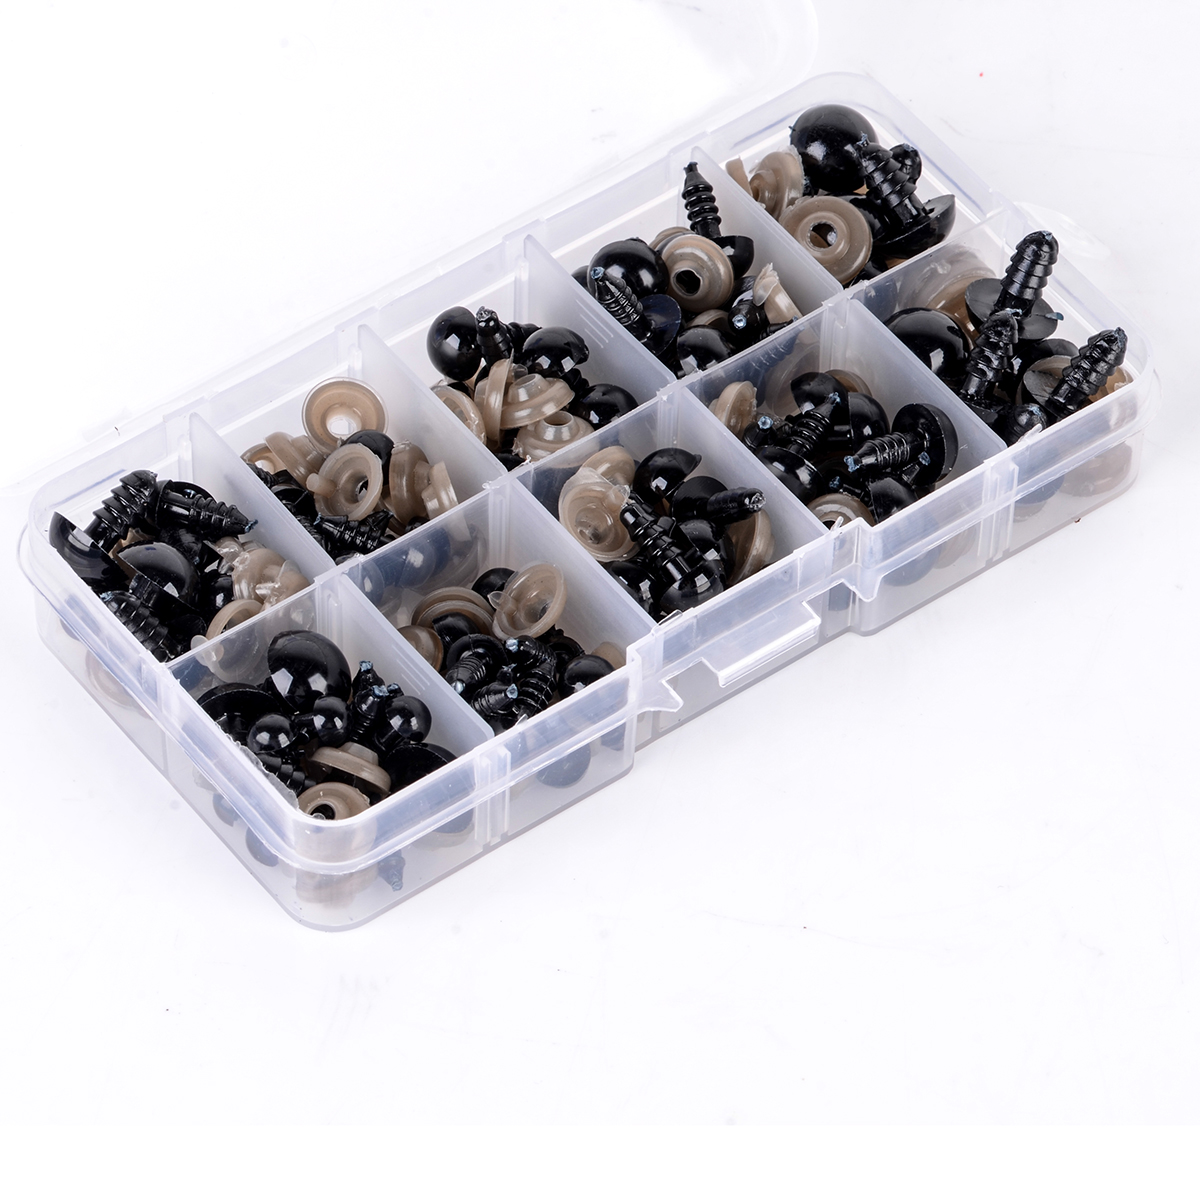 100pcs/Set Durable Doll's Eye Black Plastic Safety Eyes for Teddy Plush Toys Puppet DIY Crafts Accessories 6-12mm